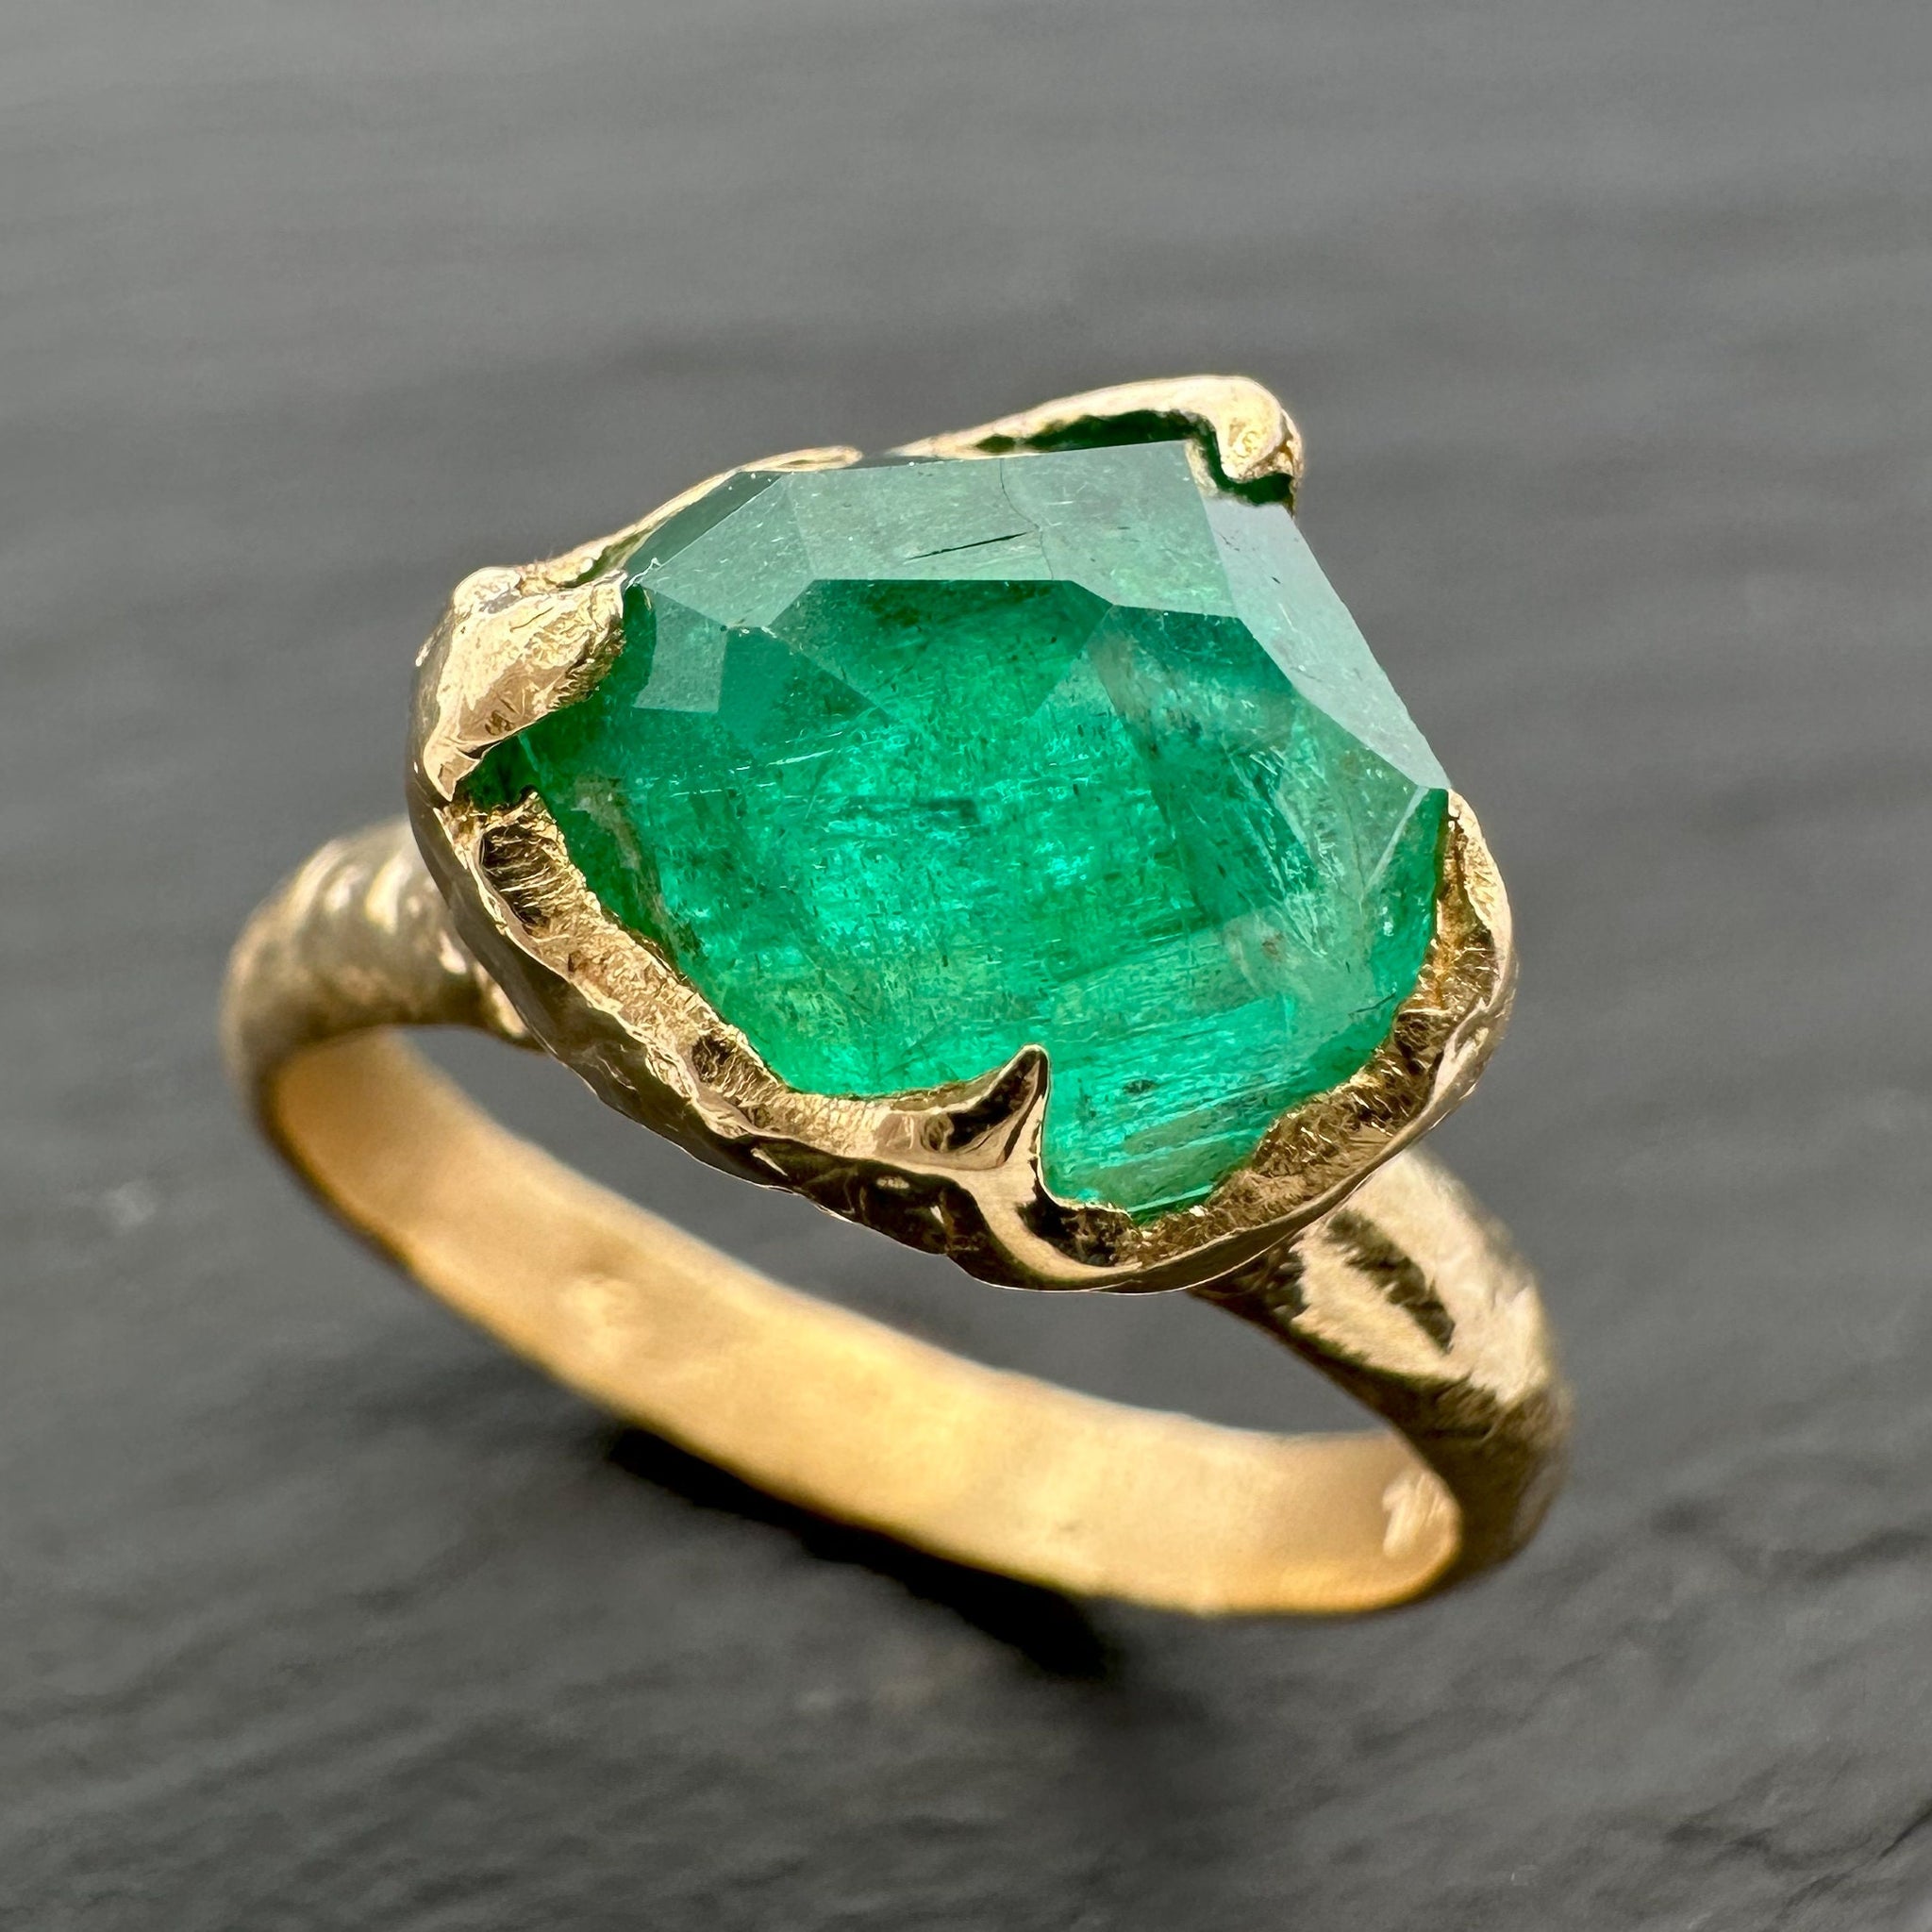 Partially Faceted Emerald Solitaire yellow 18k Gold Ring Birthstone One Of a Kind Gemstone Cocktail Ring Recycled 3480